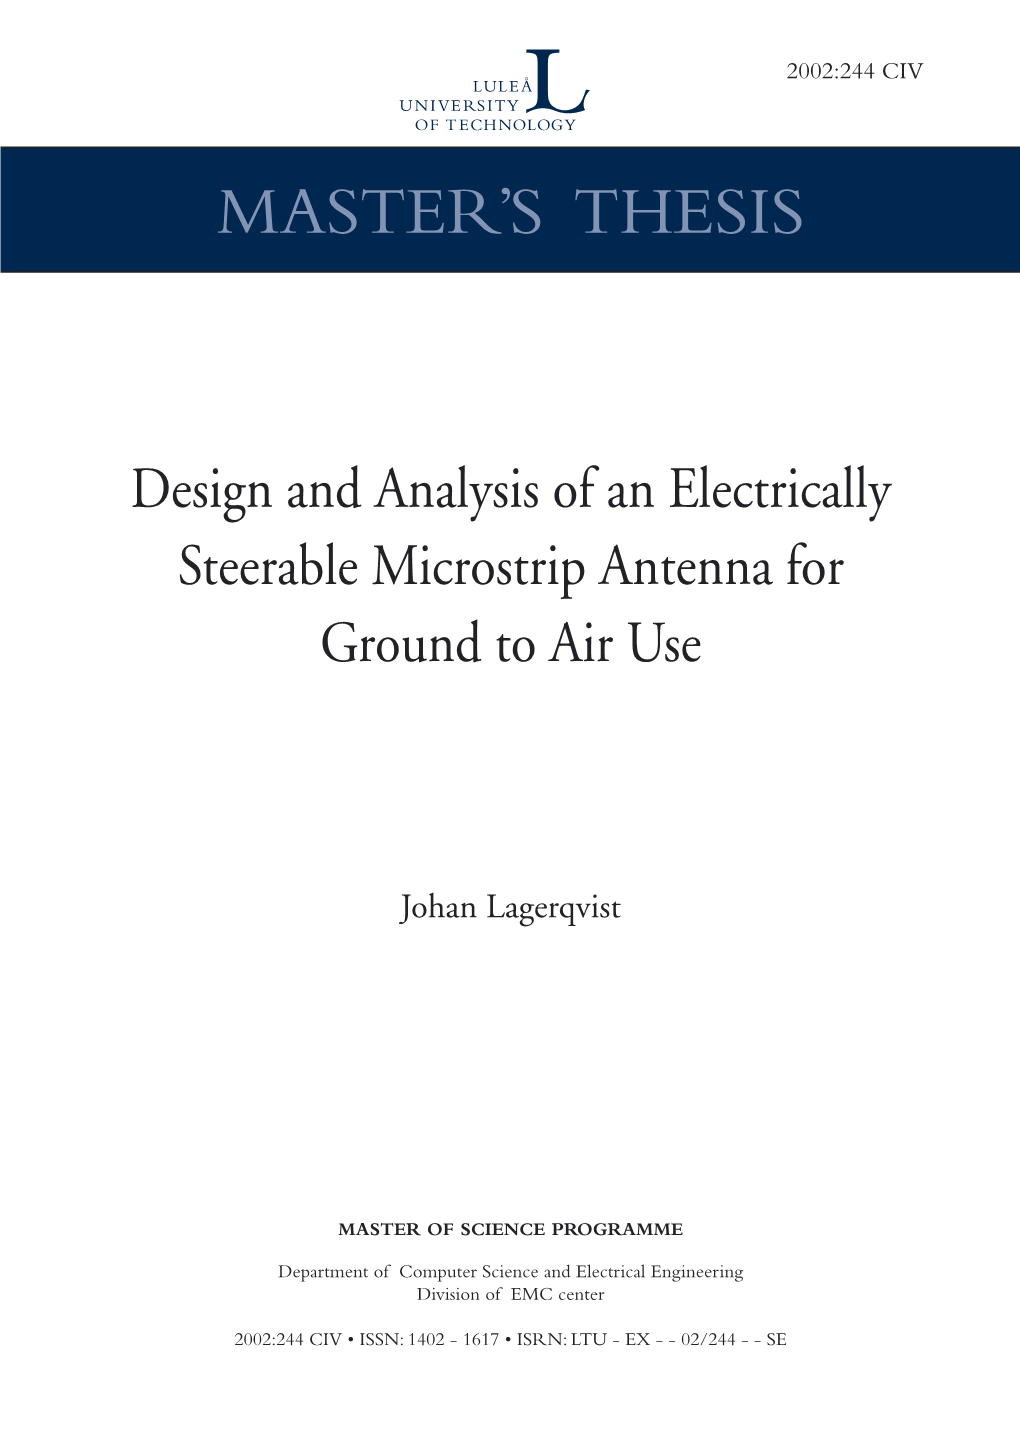 Design and Analysis of an Electrically Steerable Microstrip Antenna for Ground to Air Use